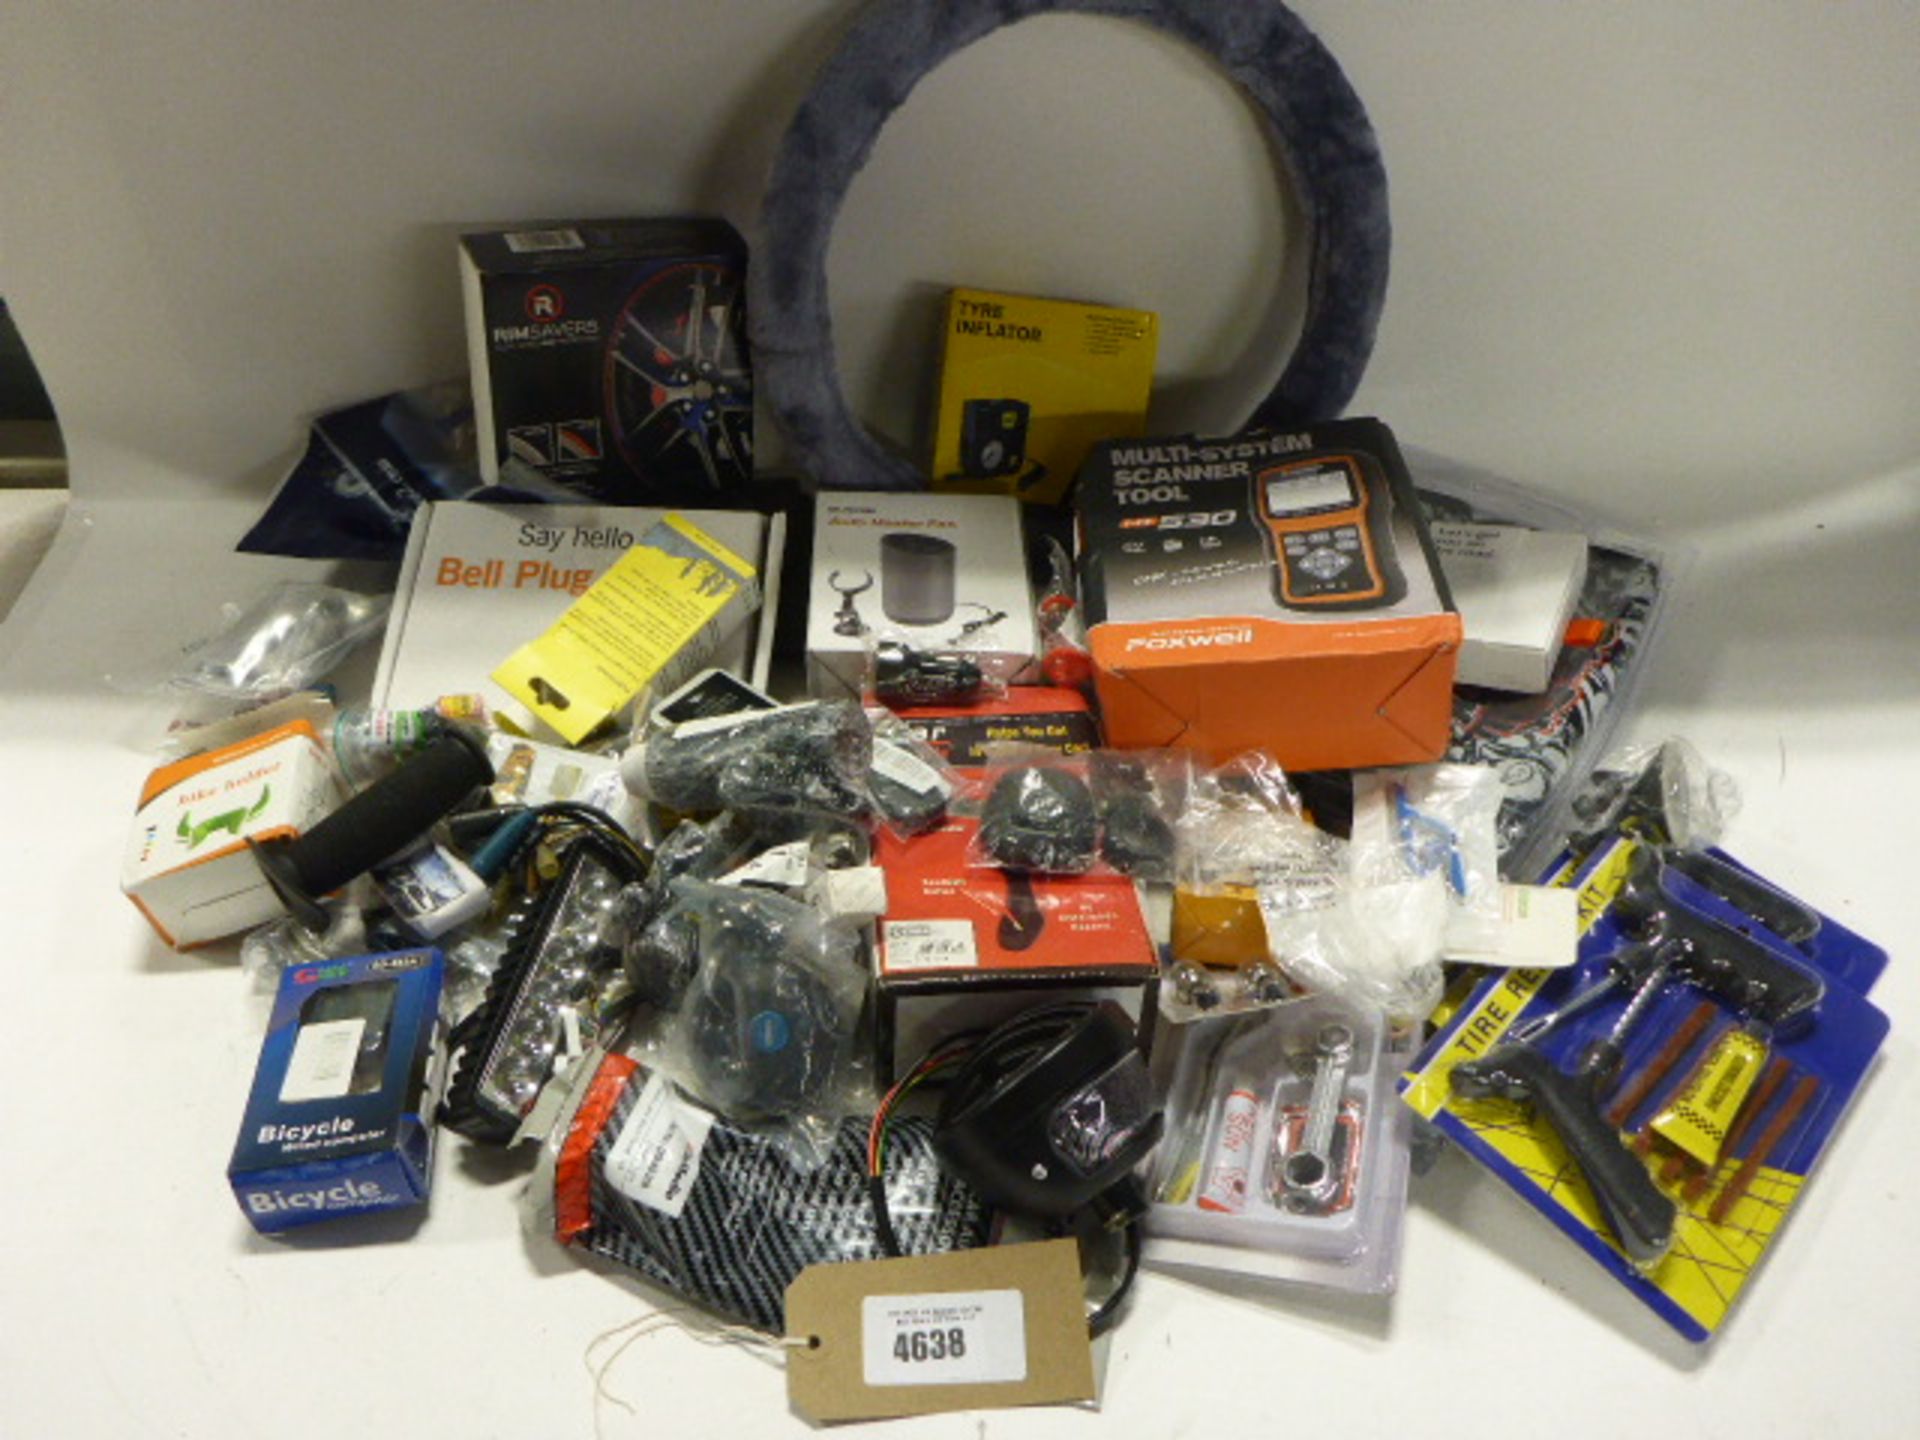 Bag containing lights, multi system scanning tools, steel wheel cover, tyre inflator, phone holders,